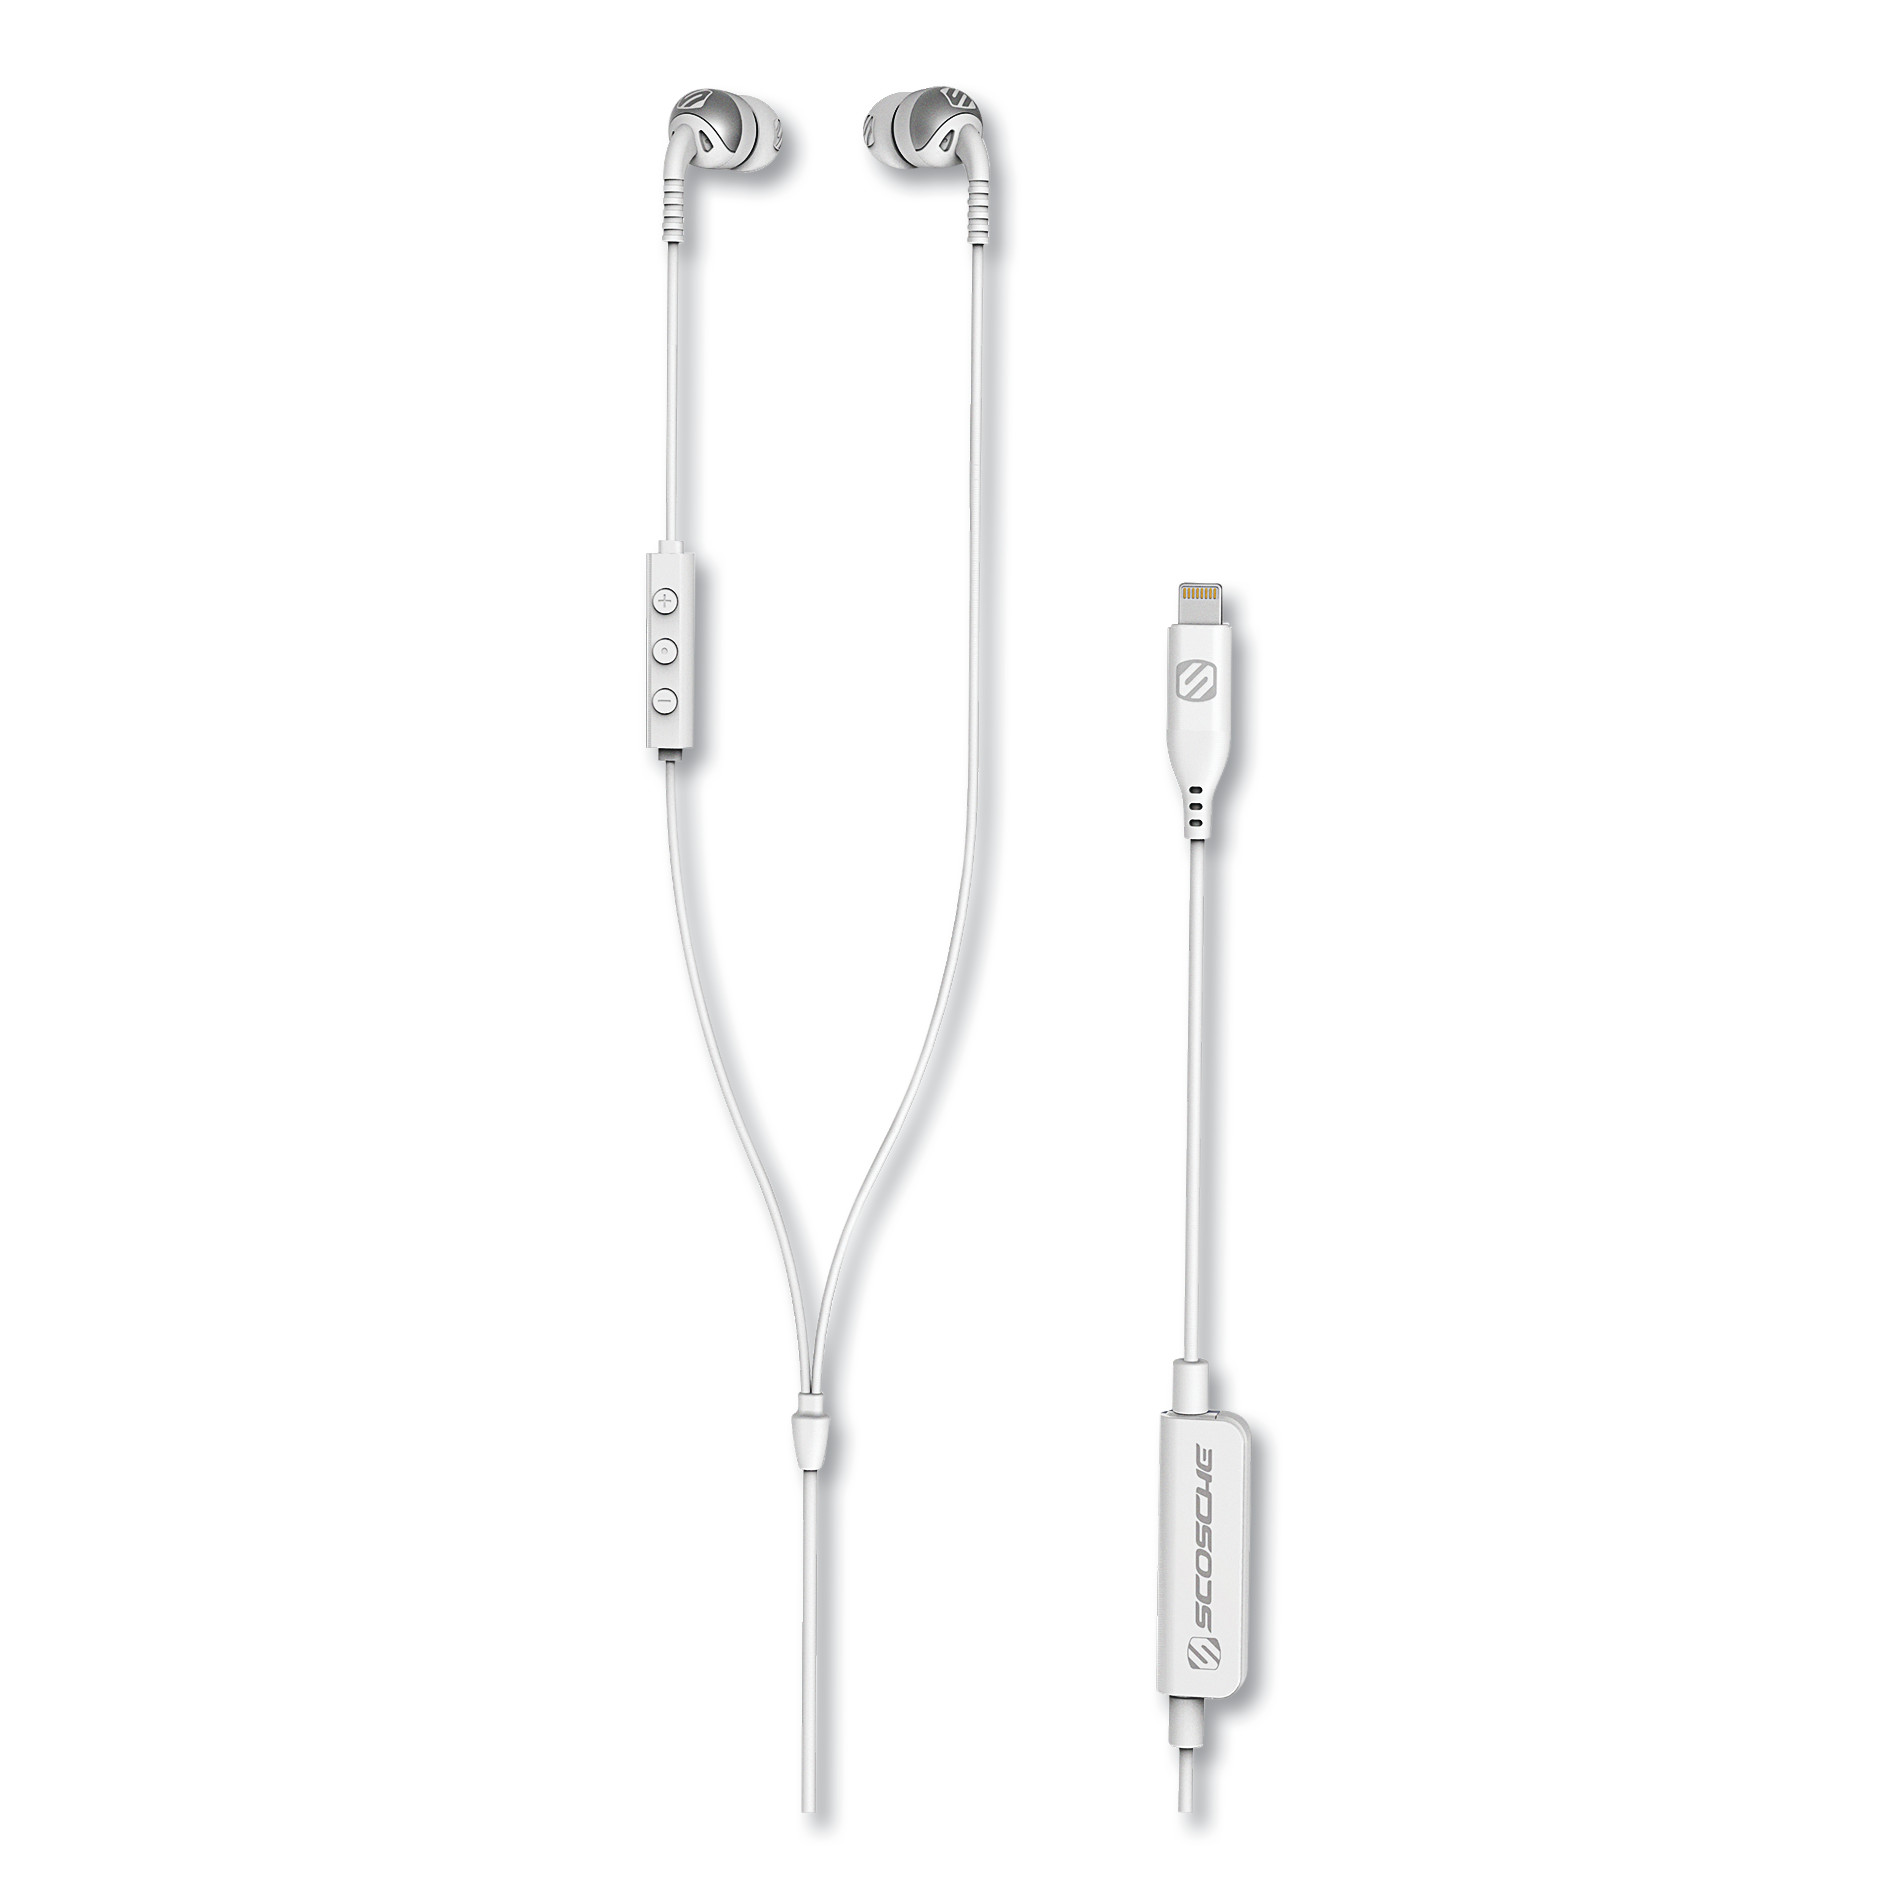  Scosche IDR301LWT Increased Dynamic Range Earbuds with Lightning Connector, White (SOSIDR301LWT) 